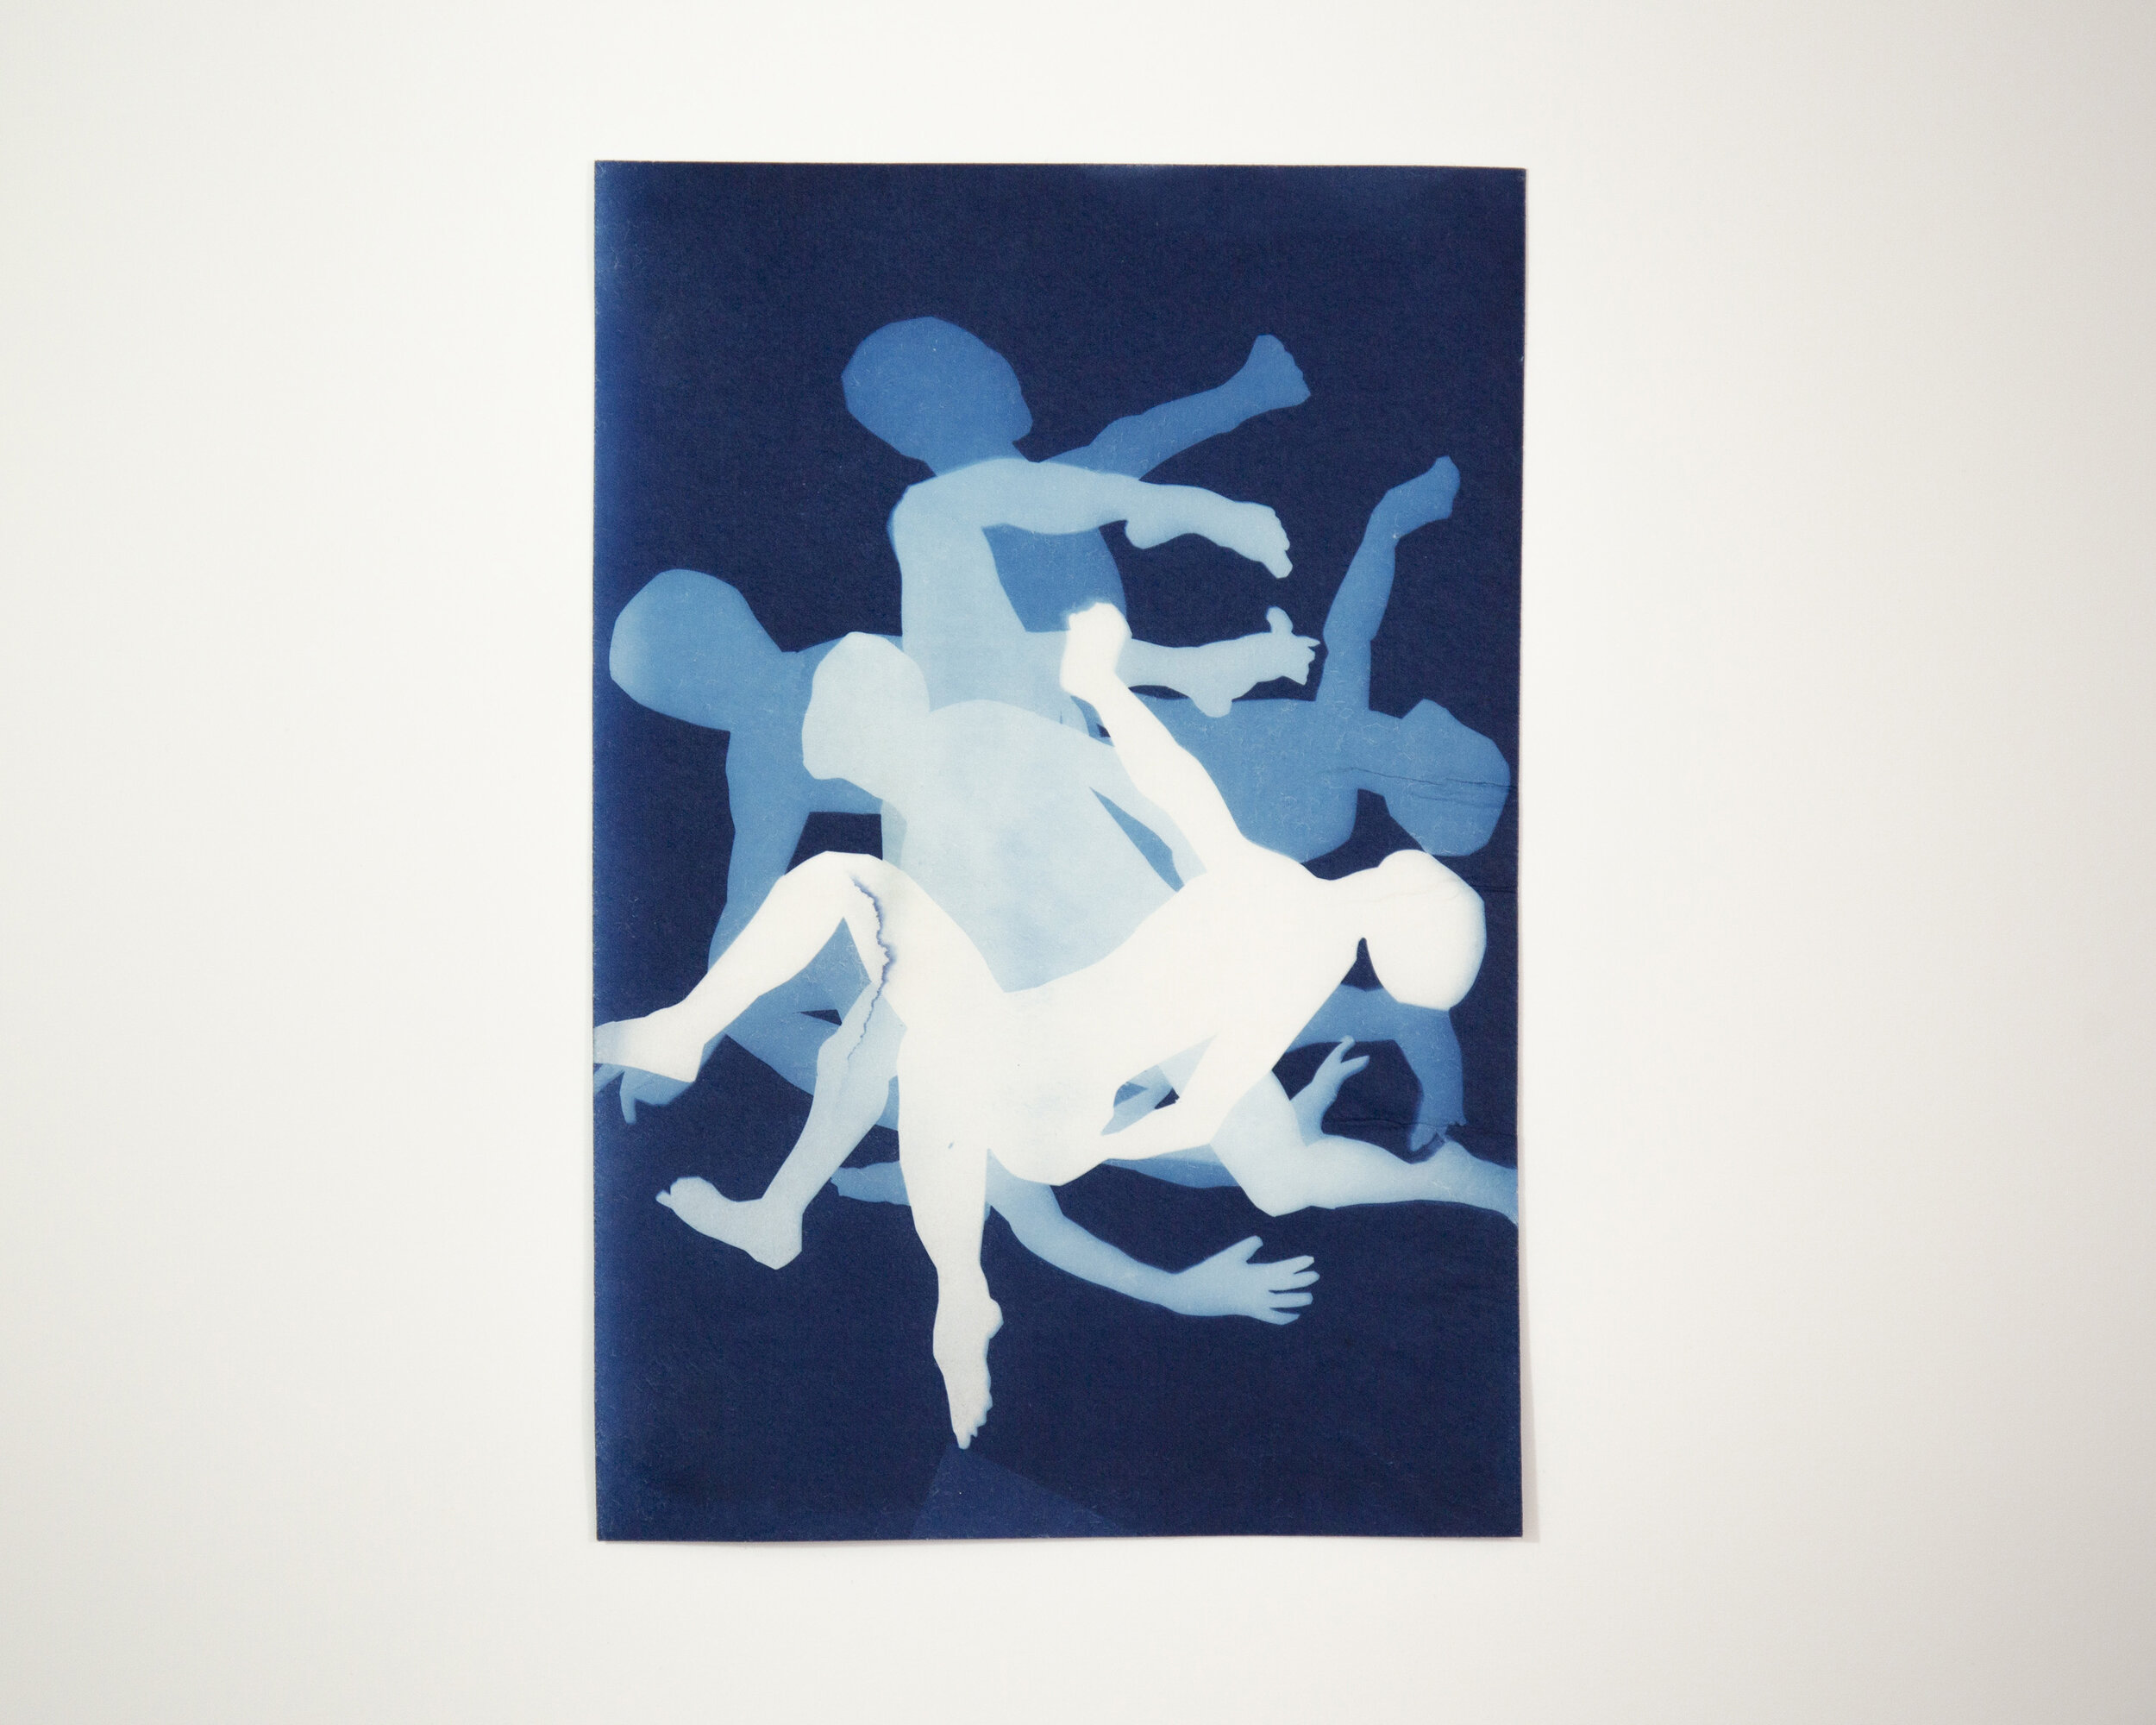  Han Qin,  Disorder as of Drinking Sweet Wine 3 , 2018. Cyanotype on paper, 10 x 6 ½ inches (25.4 x 16.8 cm) ©Han Qin, courtesy Fou Gallery 